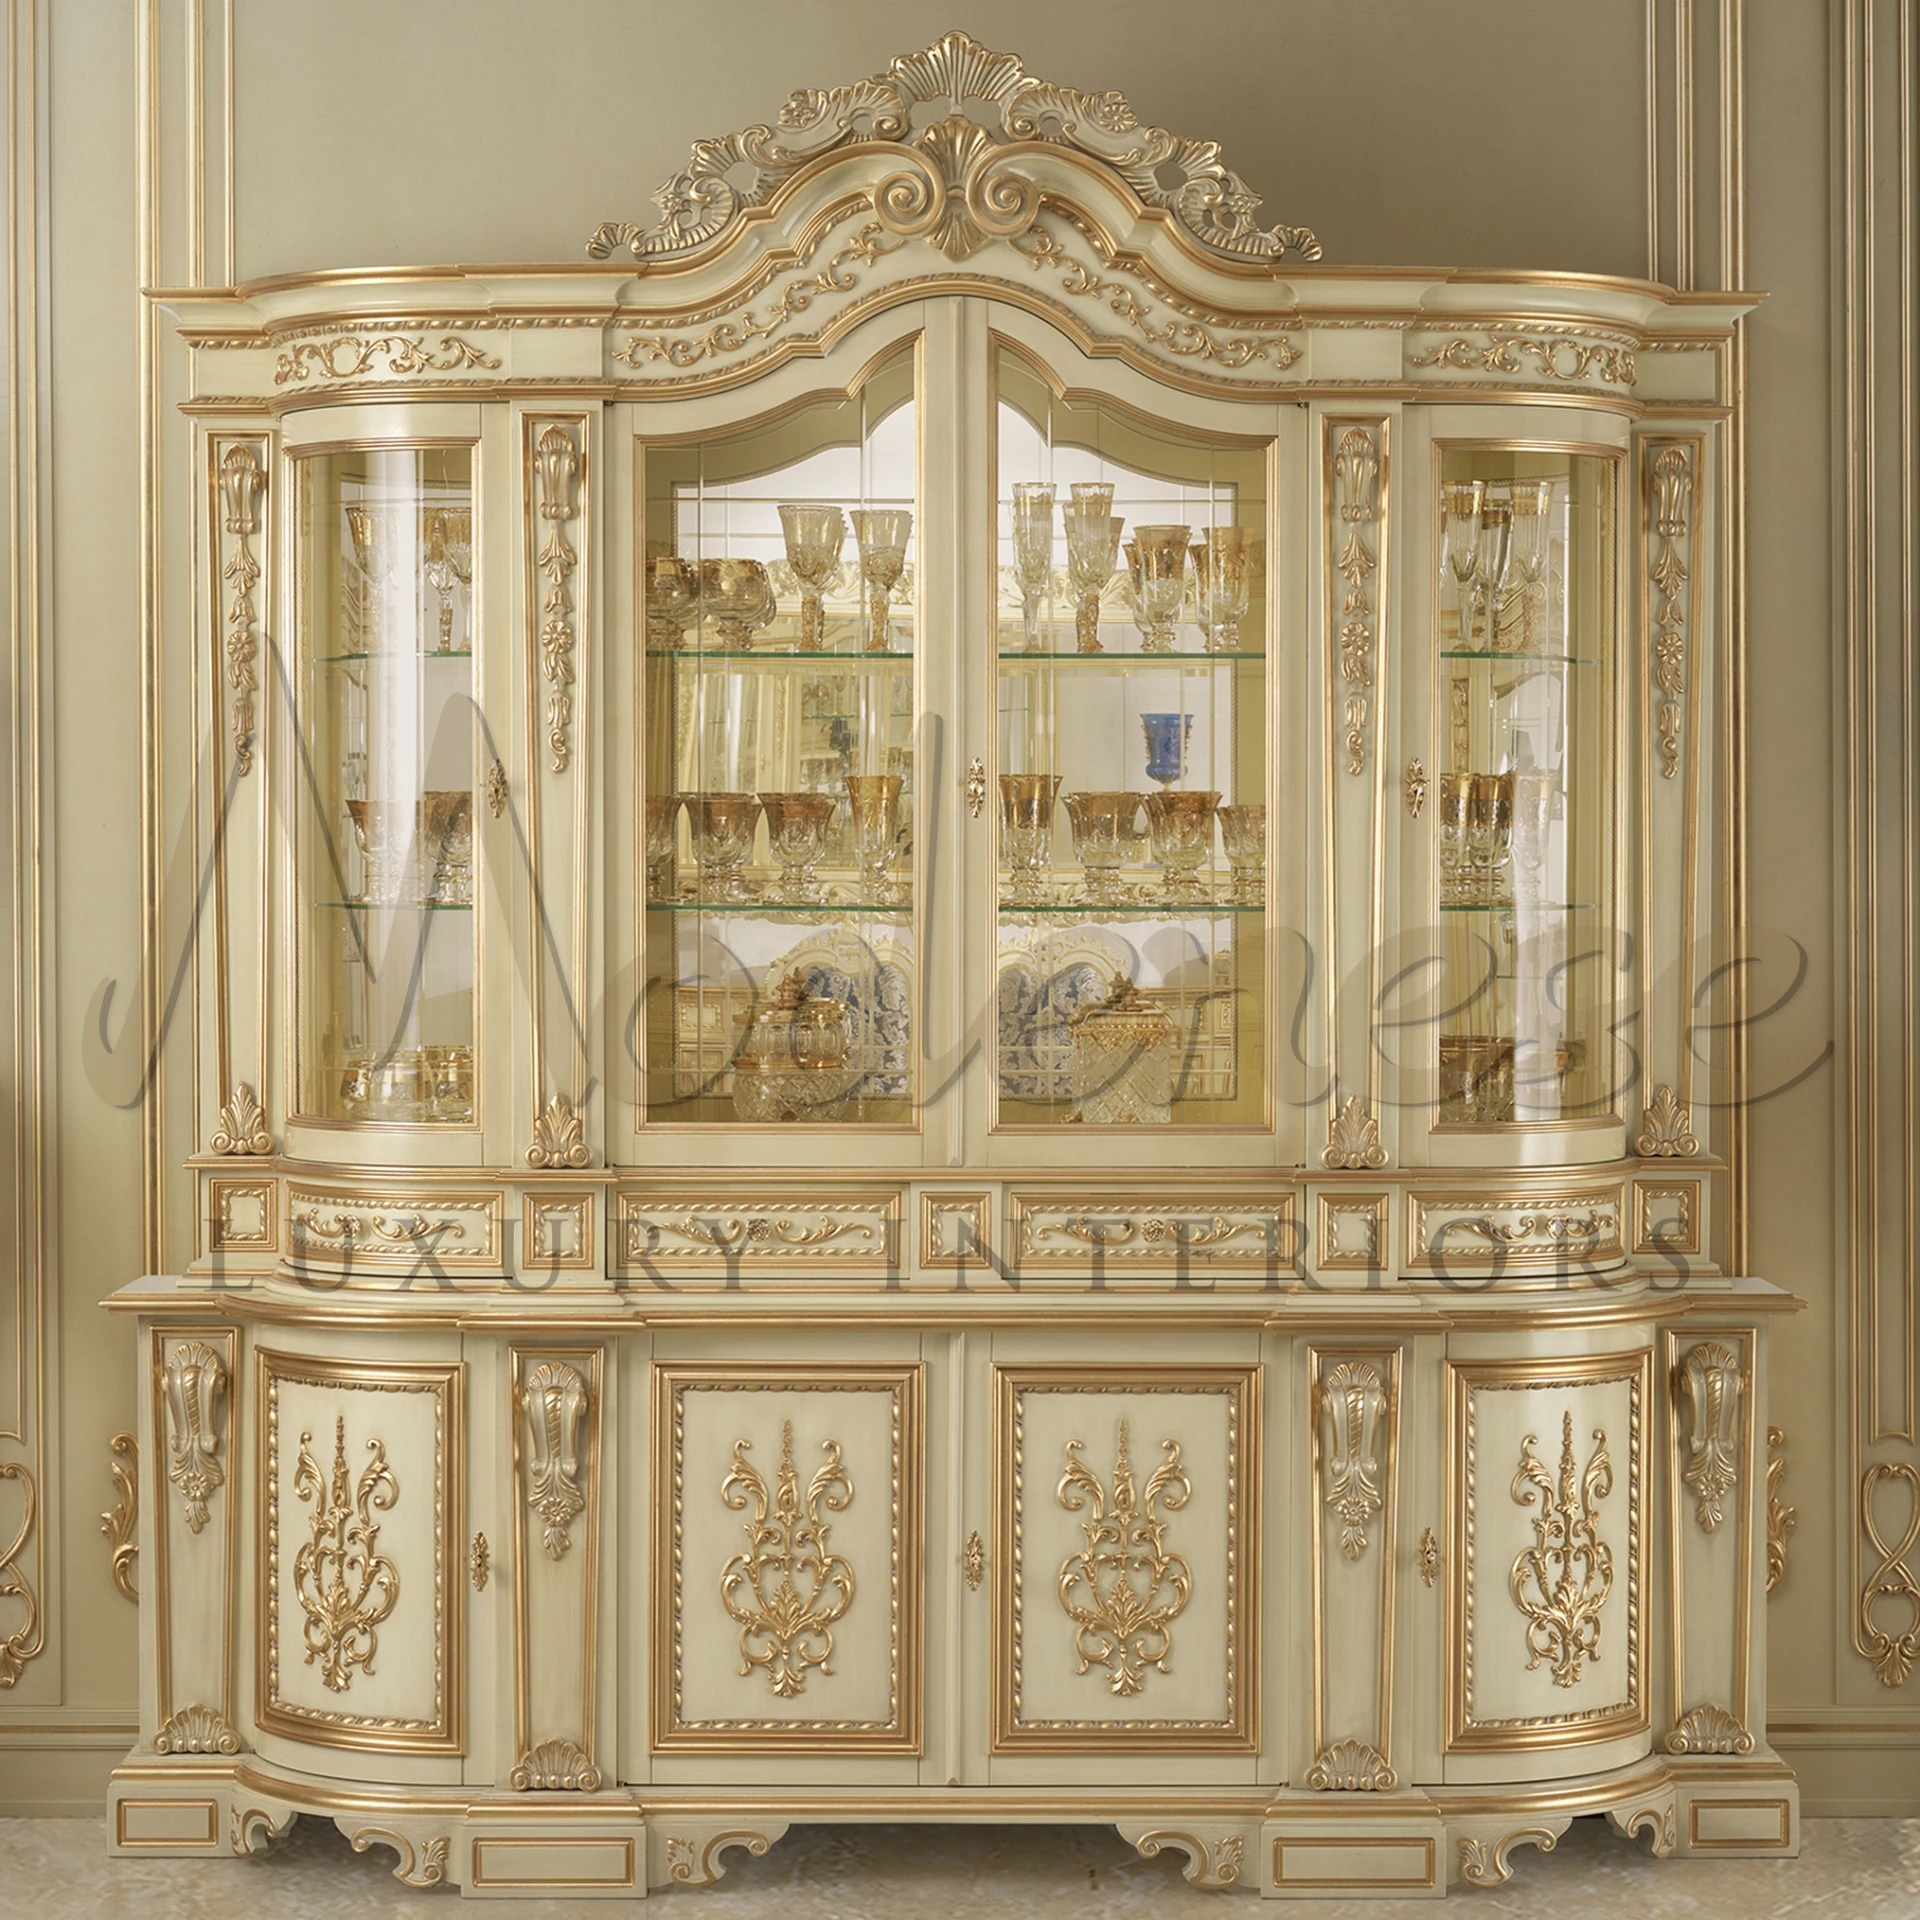 luxurious ivory cabinet with decorative carvings and glass display sections.